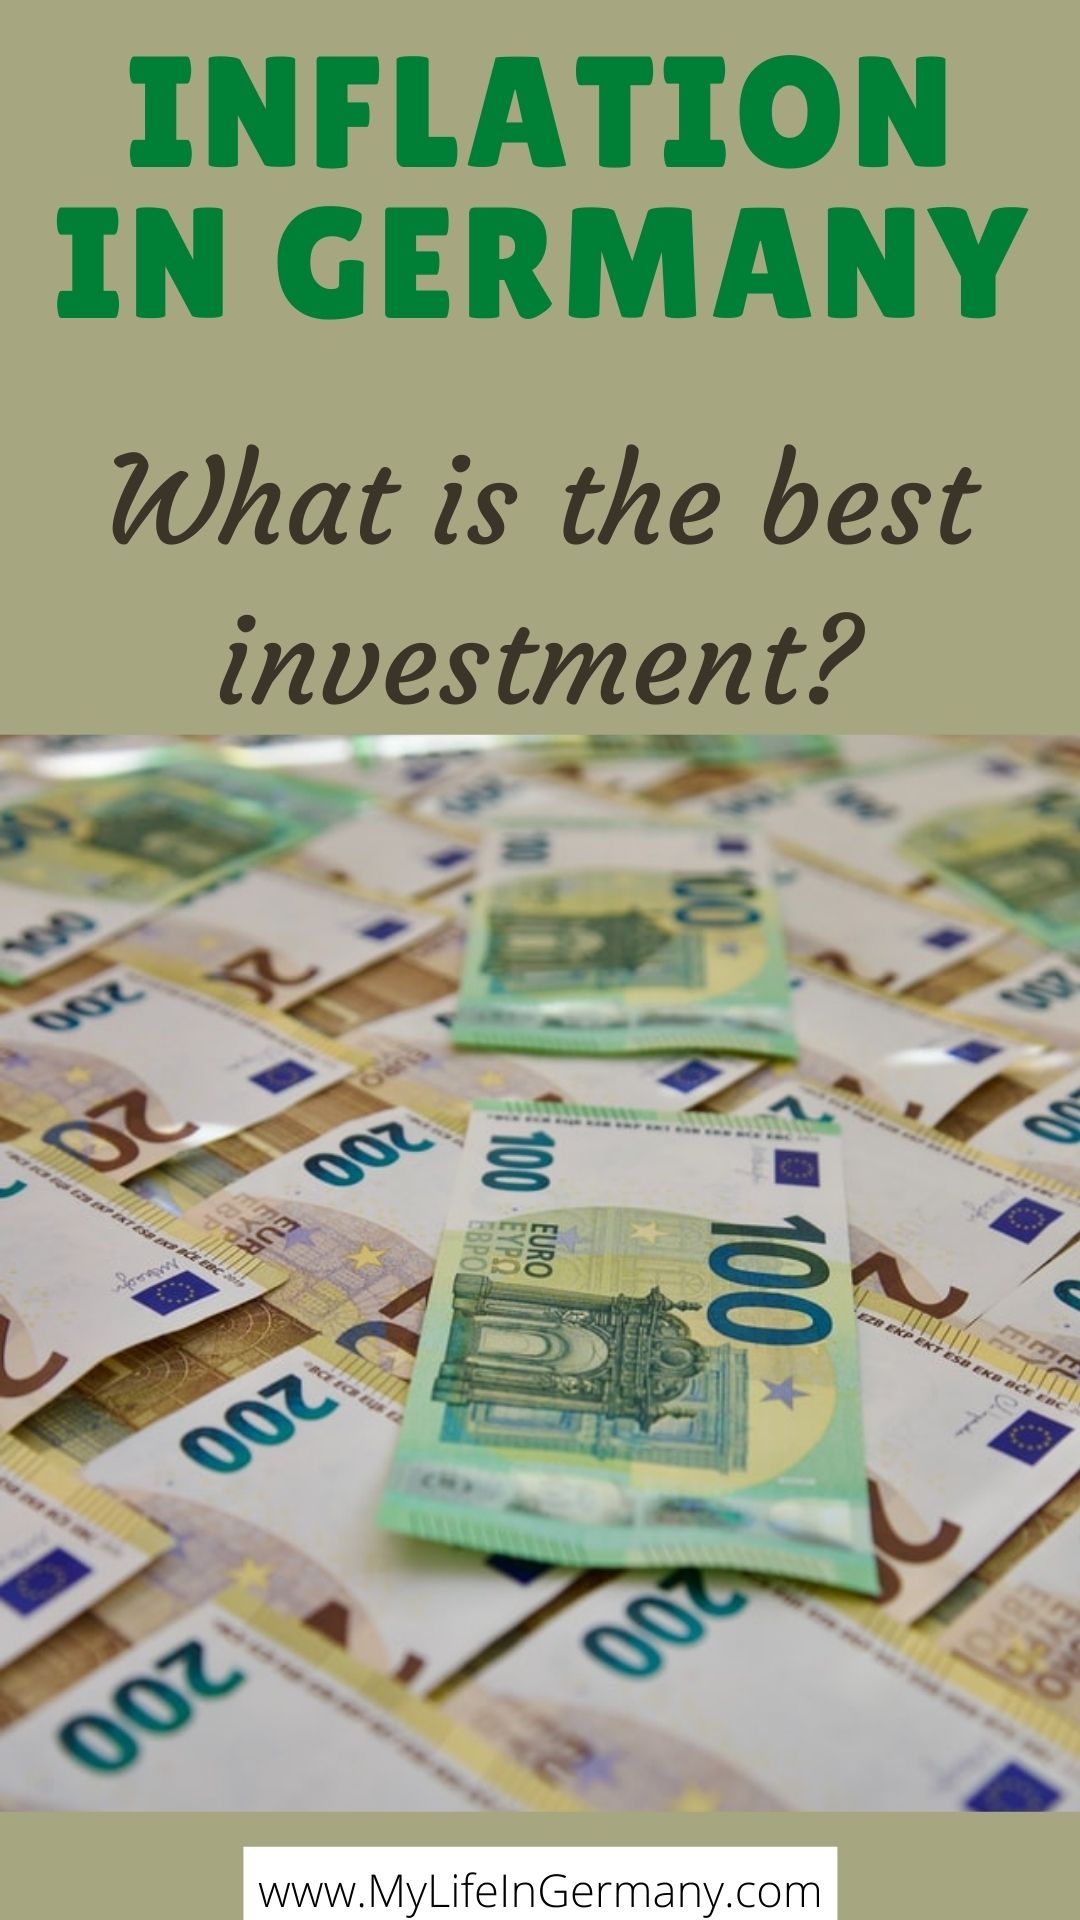 pinterest image edited_The Best Investment to Profit From Inflation in Germany_my life in germany_hkwomanabroad